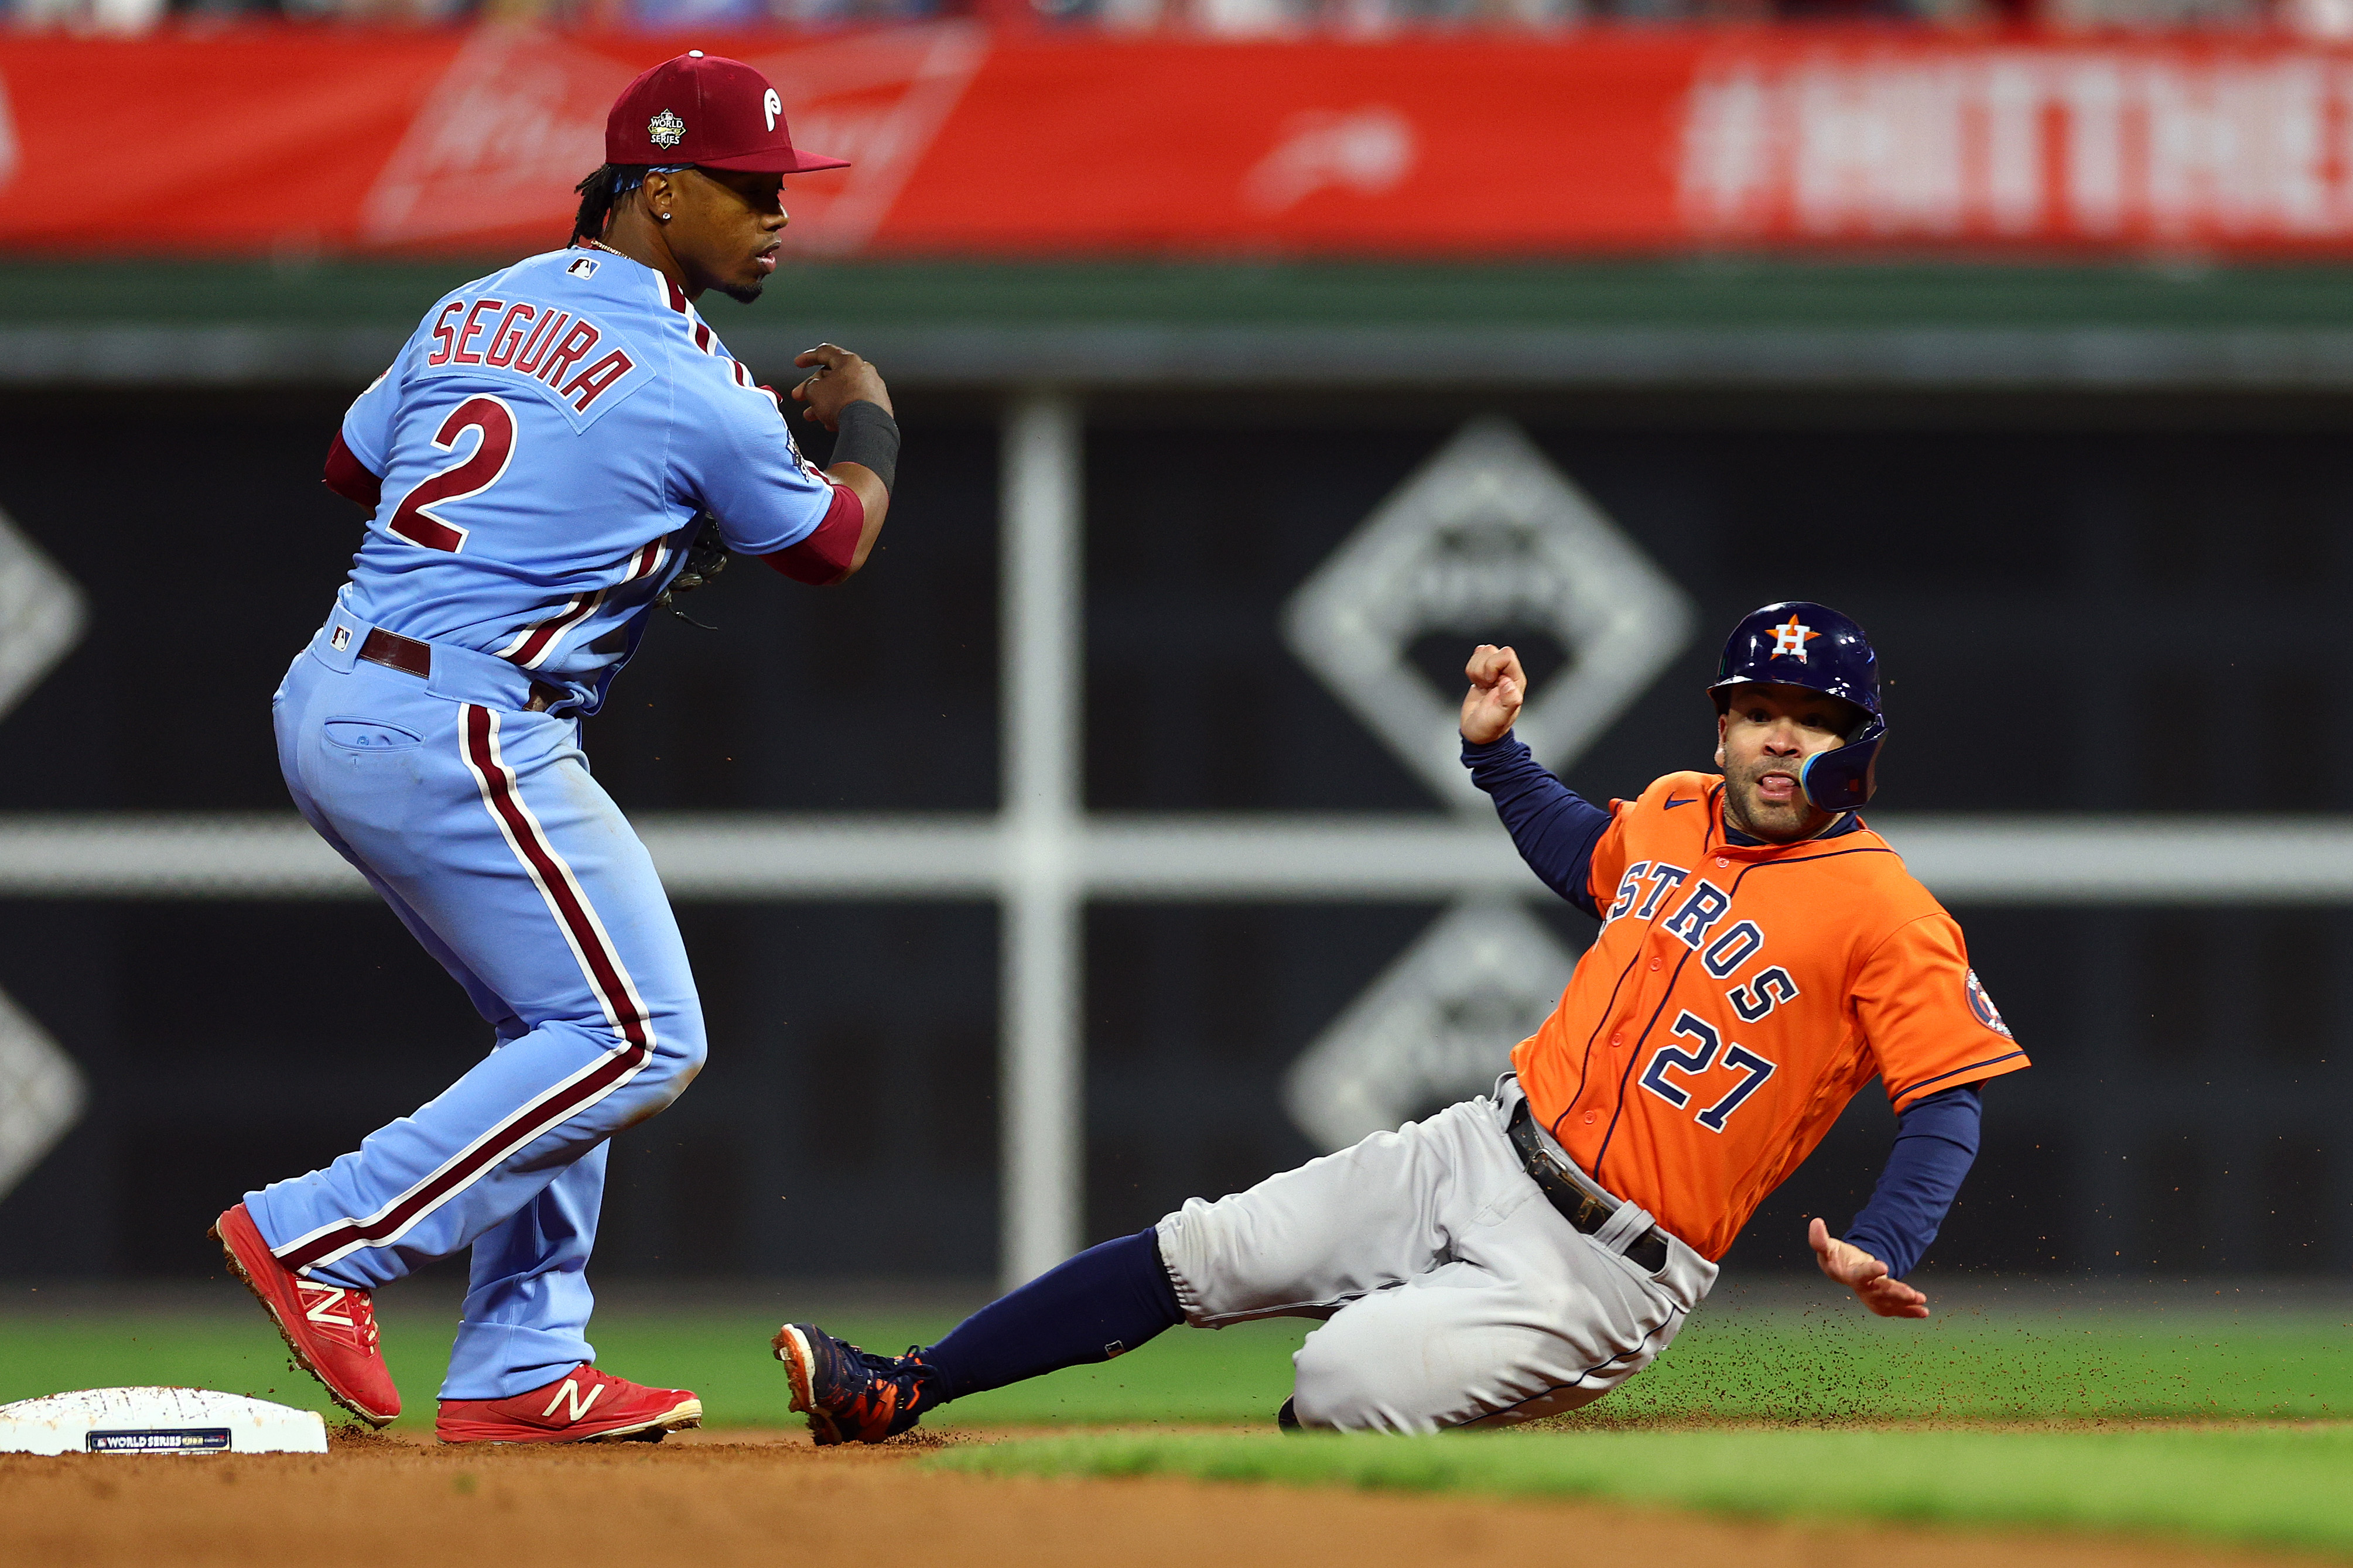 Astros hold off Phillies, take 3-2 lead in World Series